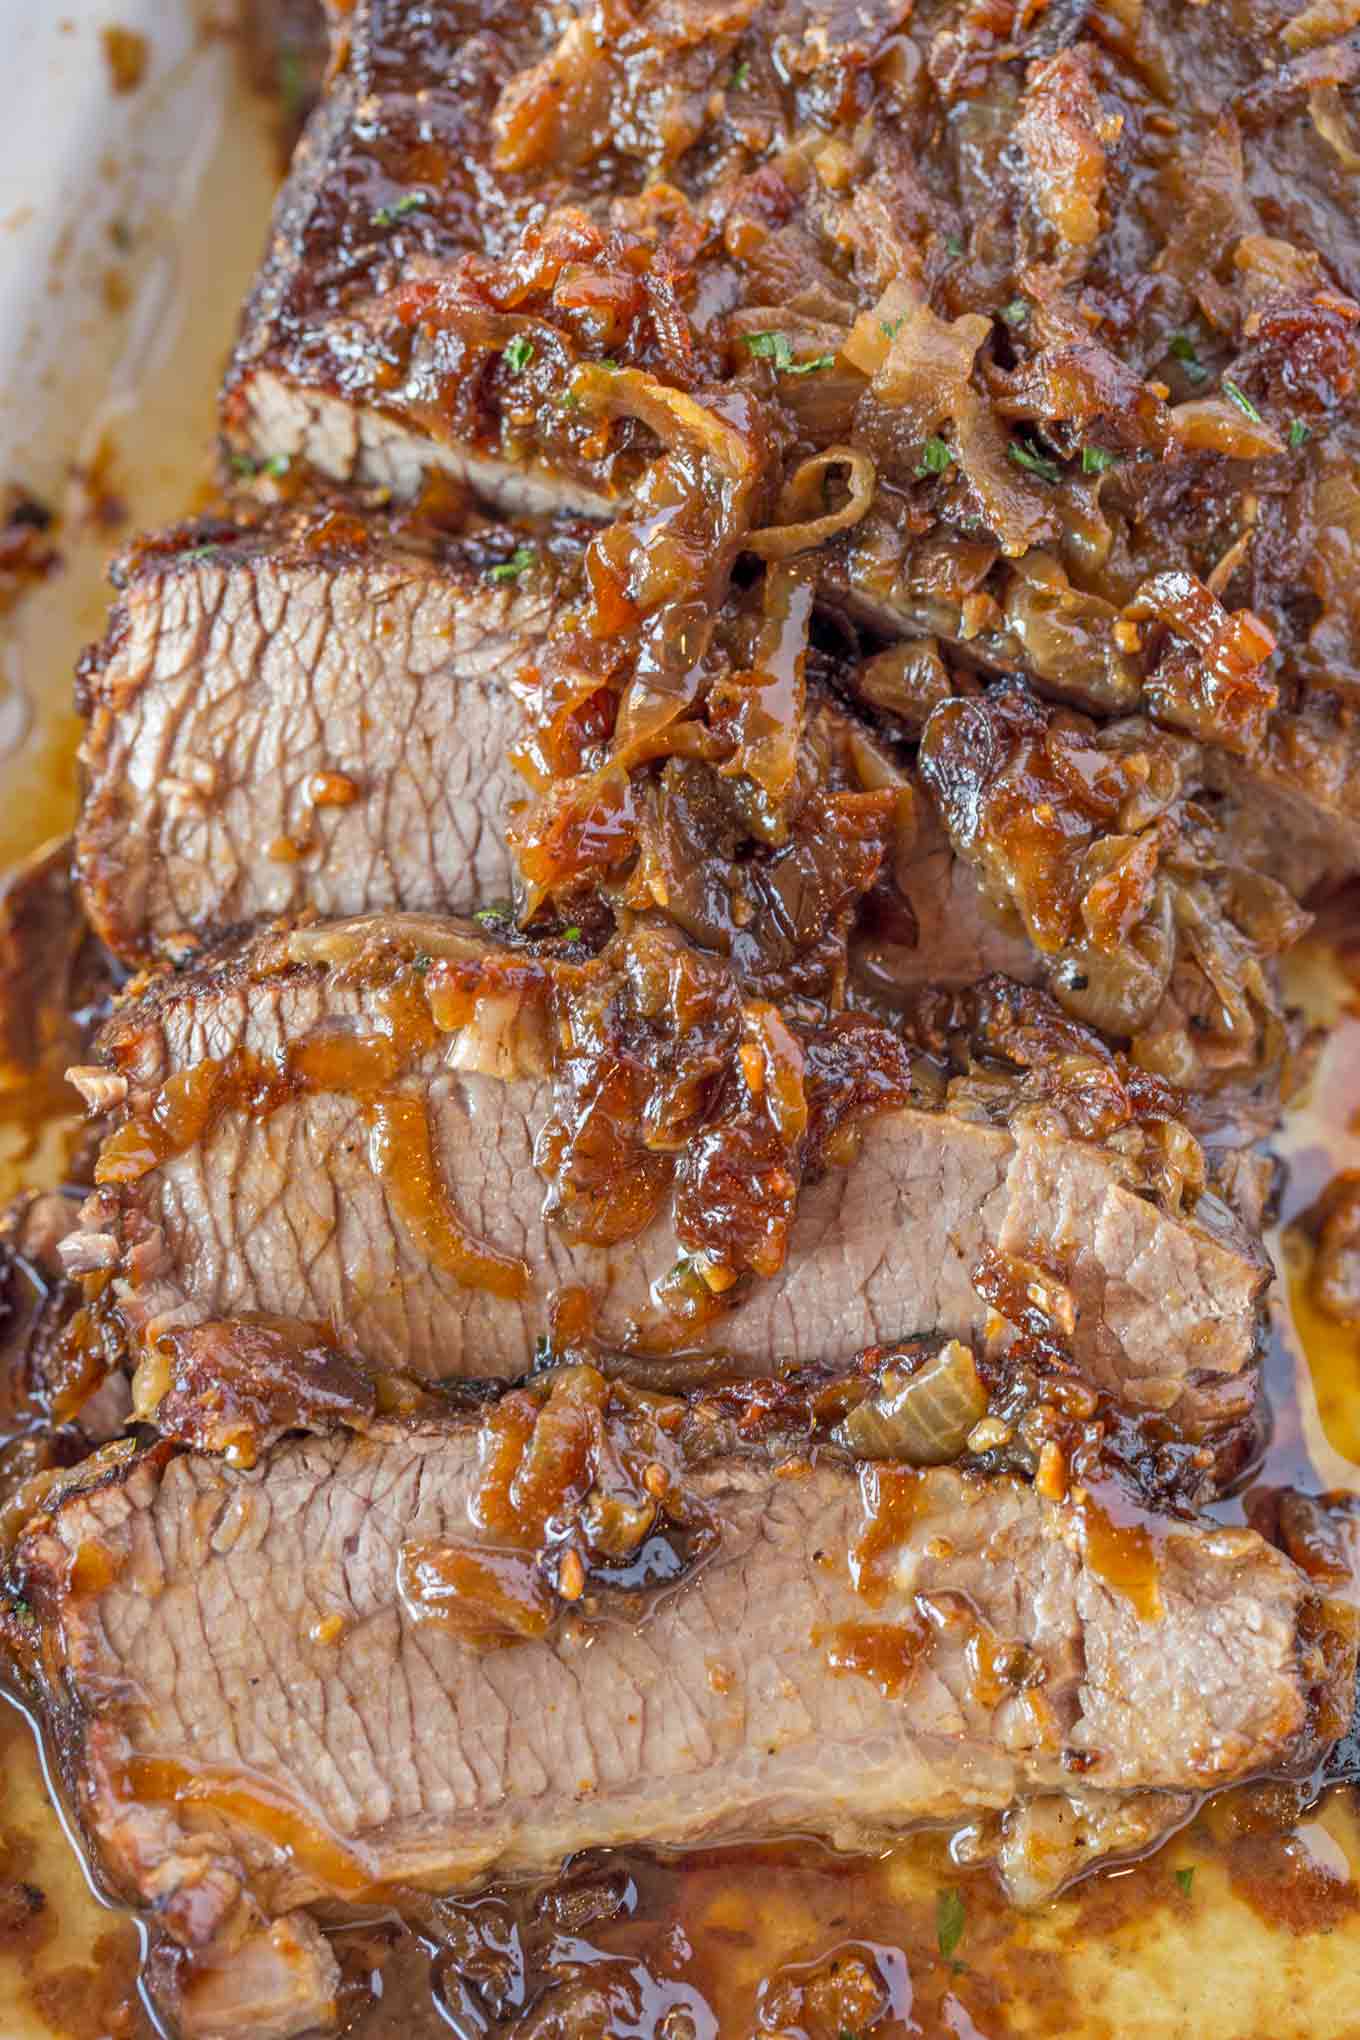 Brisket that is easy to make in oven